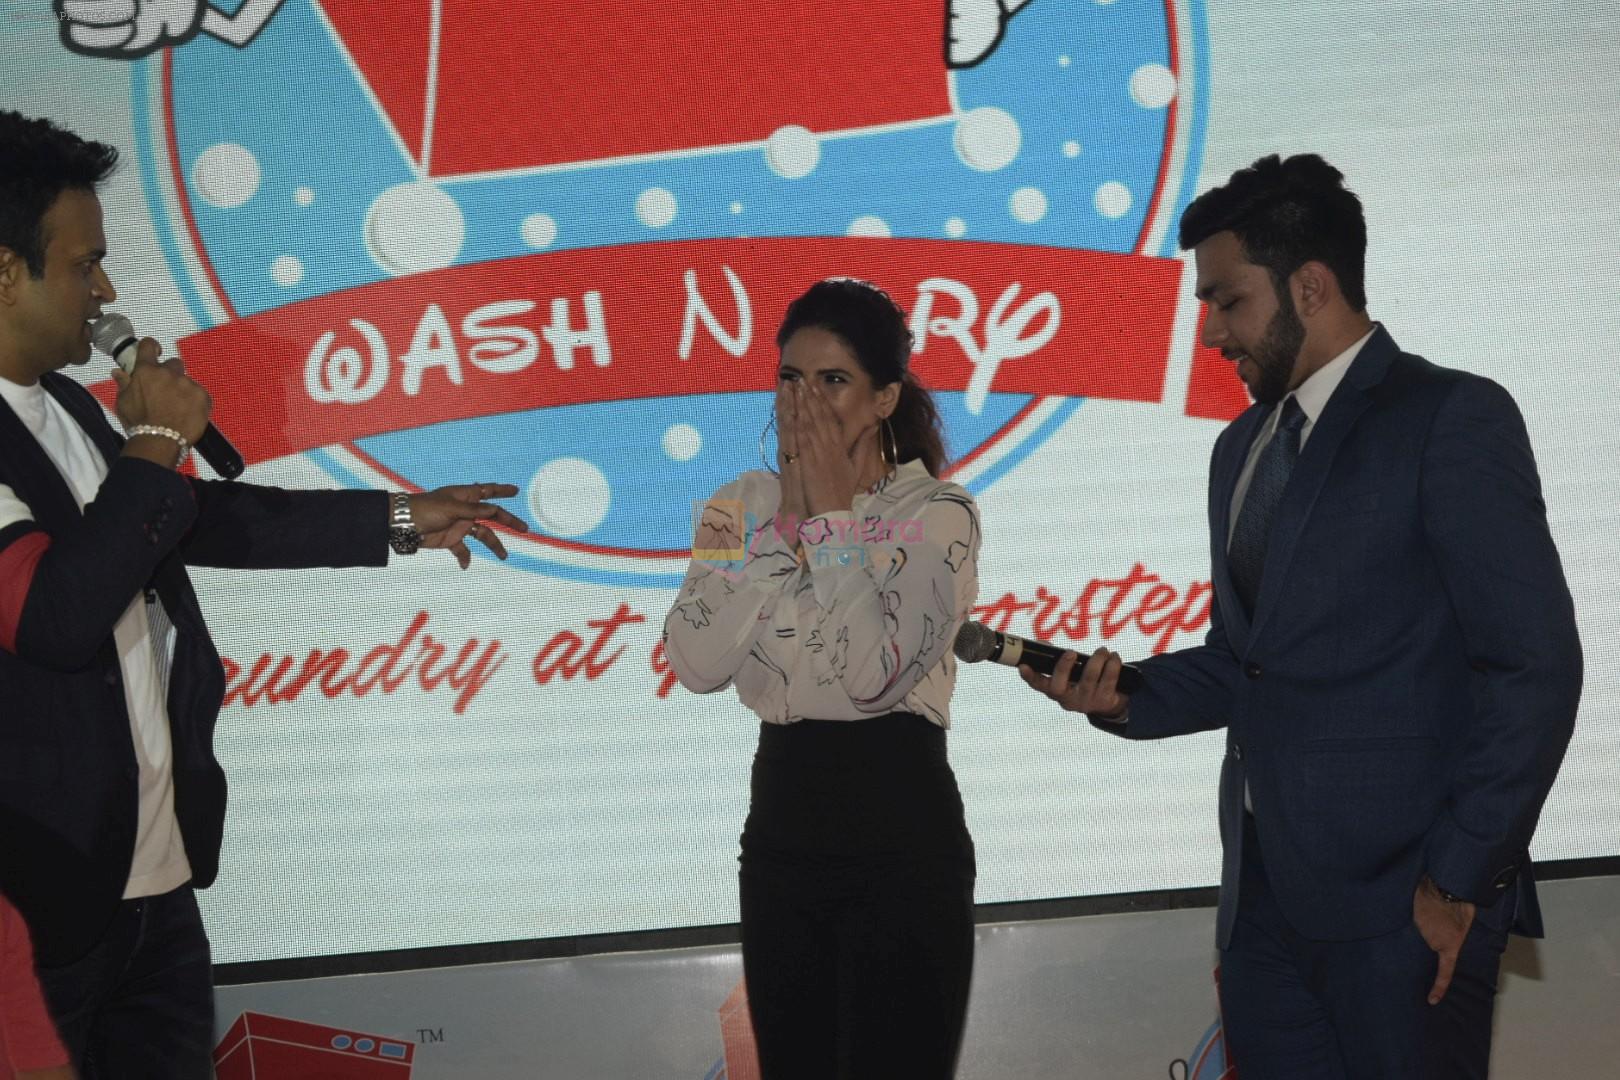 Zareen Khan at the Launch of Wash & Dry app at andheri on 10th Sept 2018